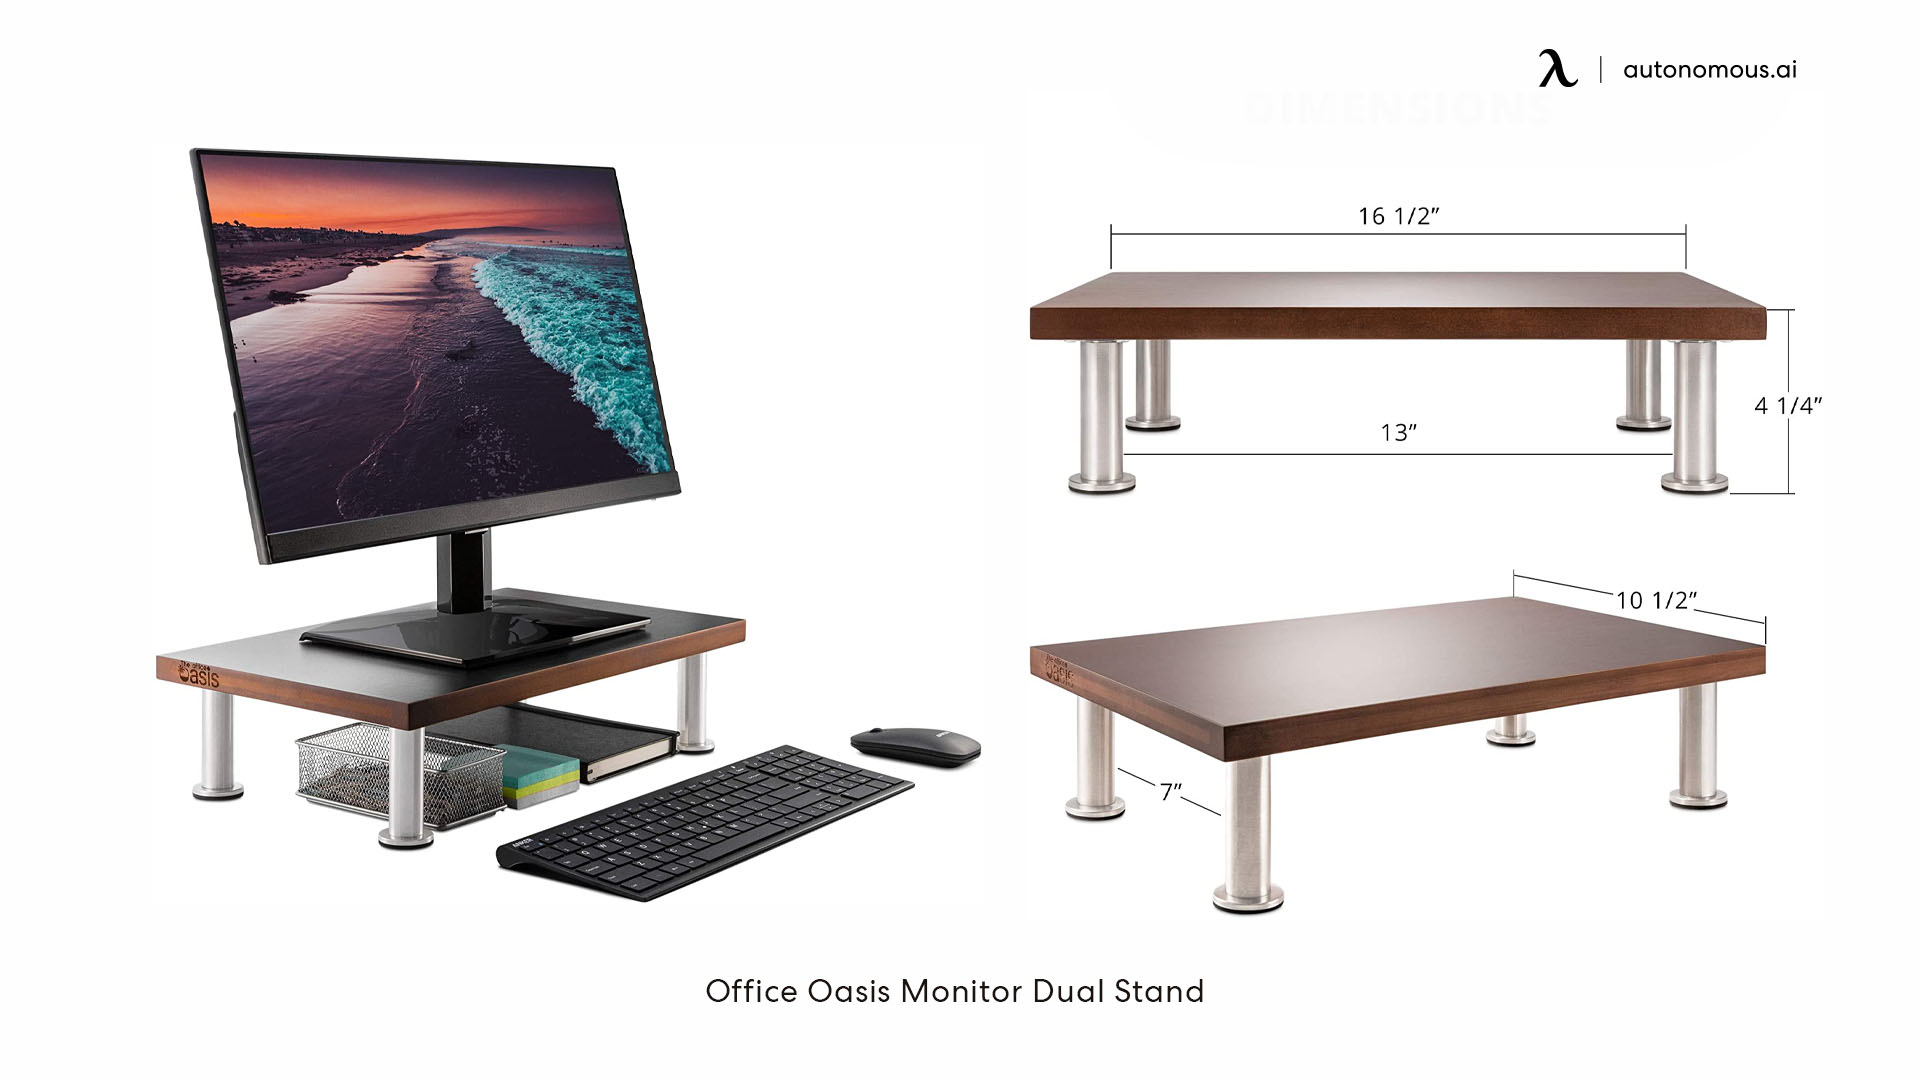 Office Oasis Monitor Dual Stand